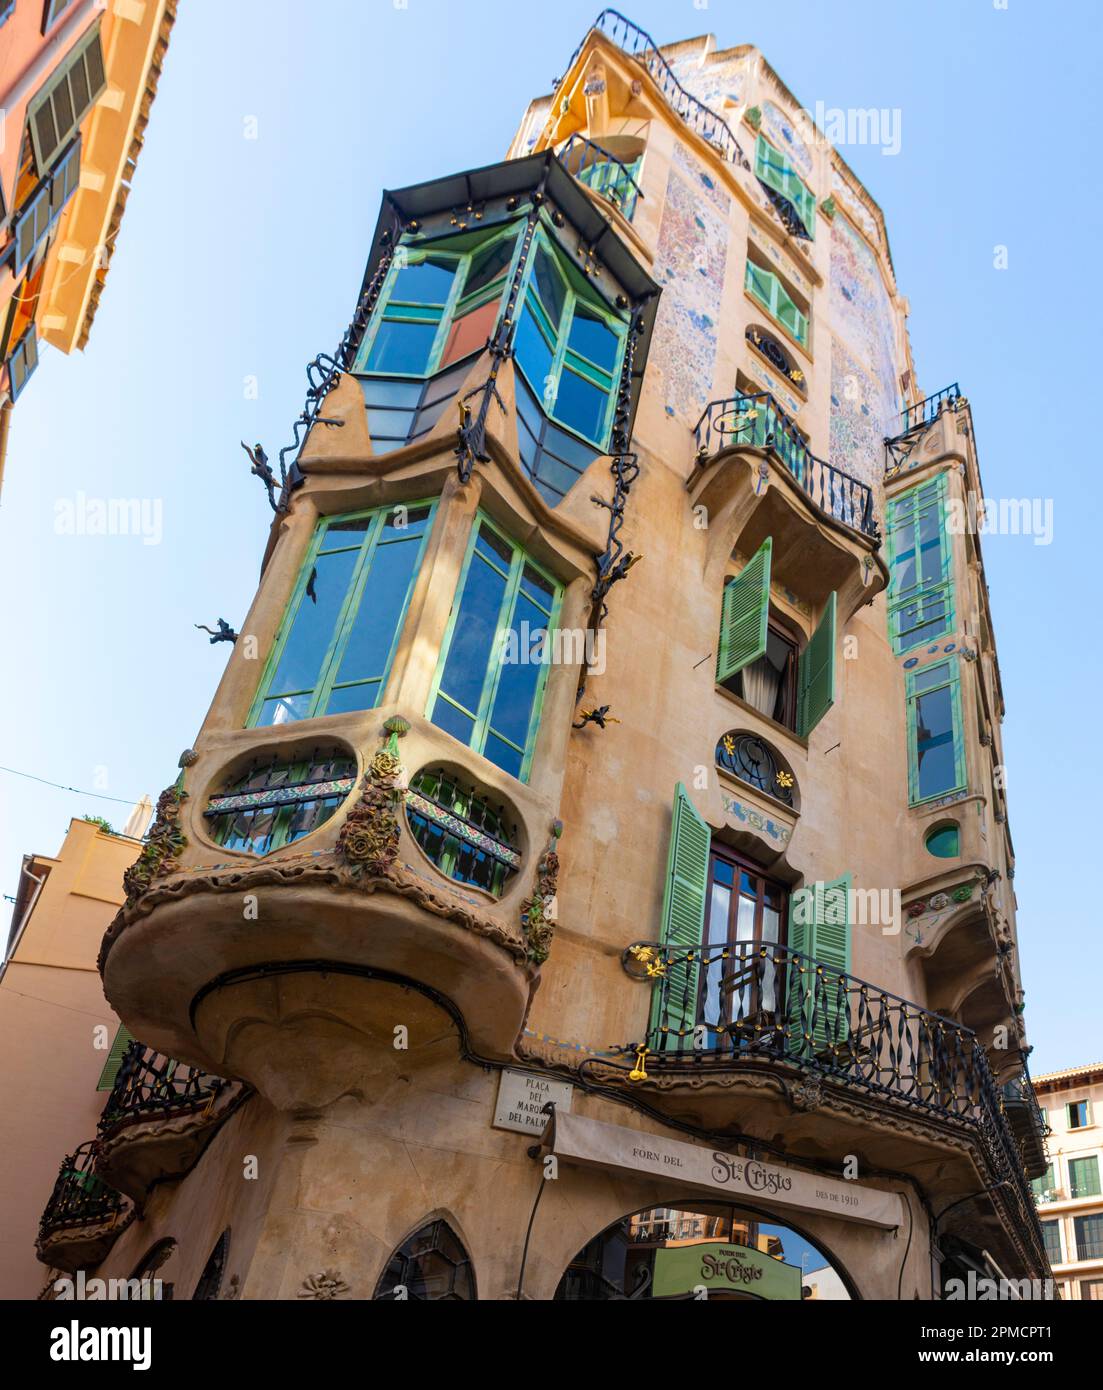 Palma, Mallorca, Balearic Islands, Spain. July 21, 2022 - Can Forteza Rey building, modernist or Art Nouveau style, similar to the architectural works Stock Photo